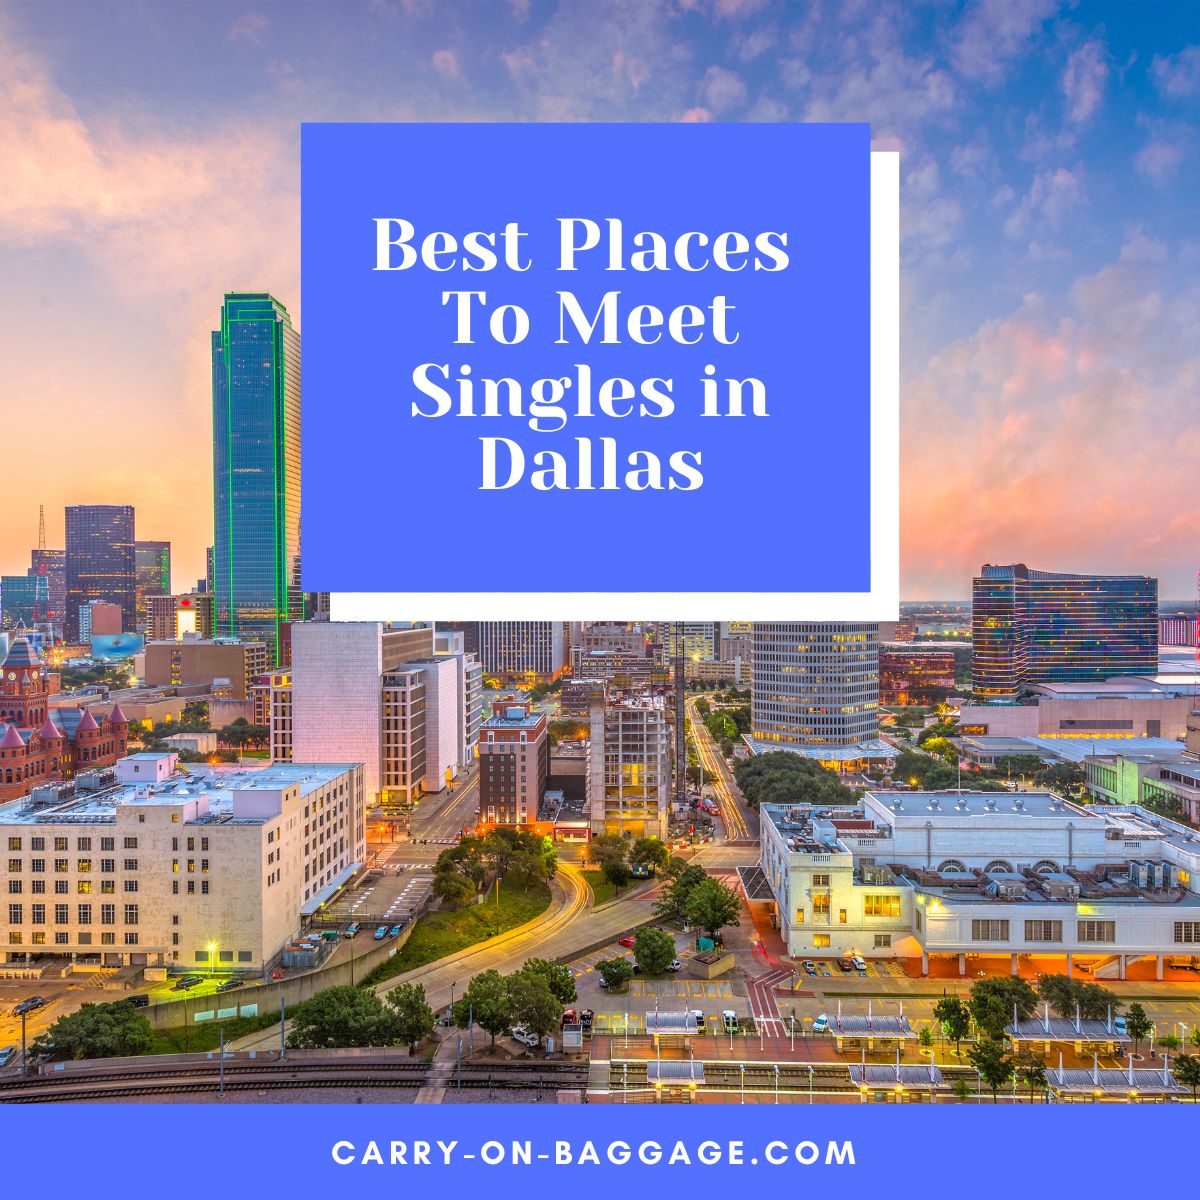 Best Places to Meet Singles in Dallas